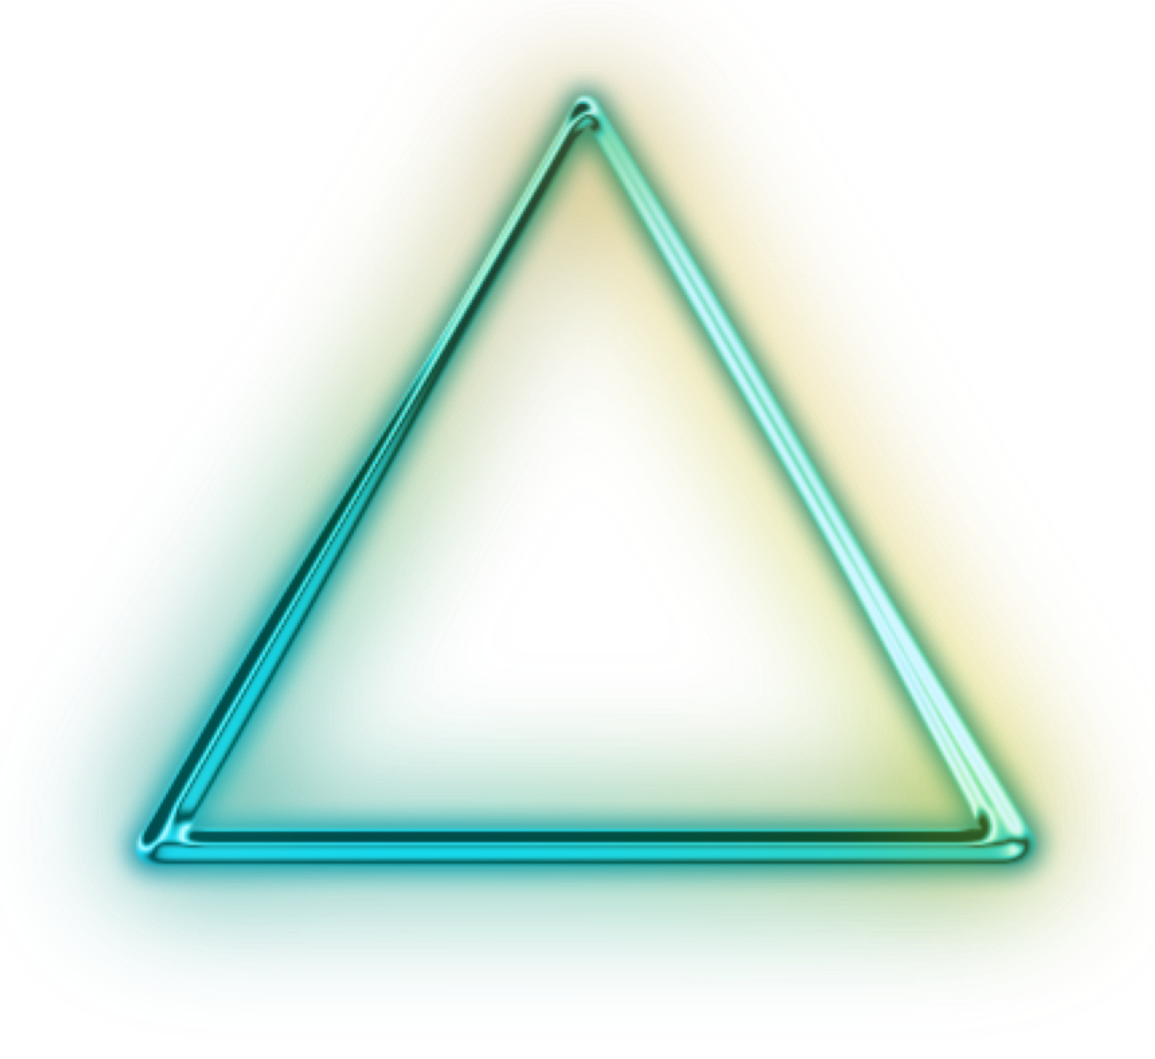 Light Triangle Effect Glow Free Photo PNG Image